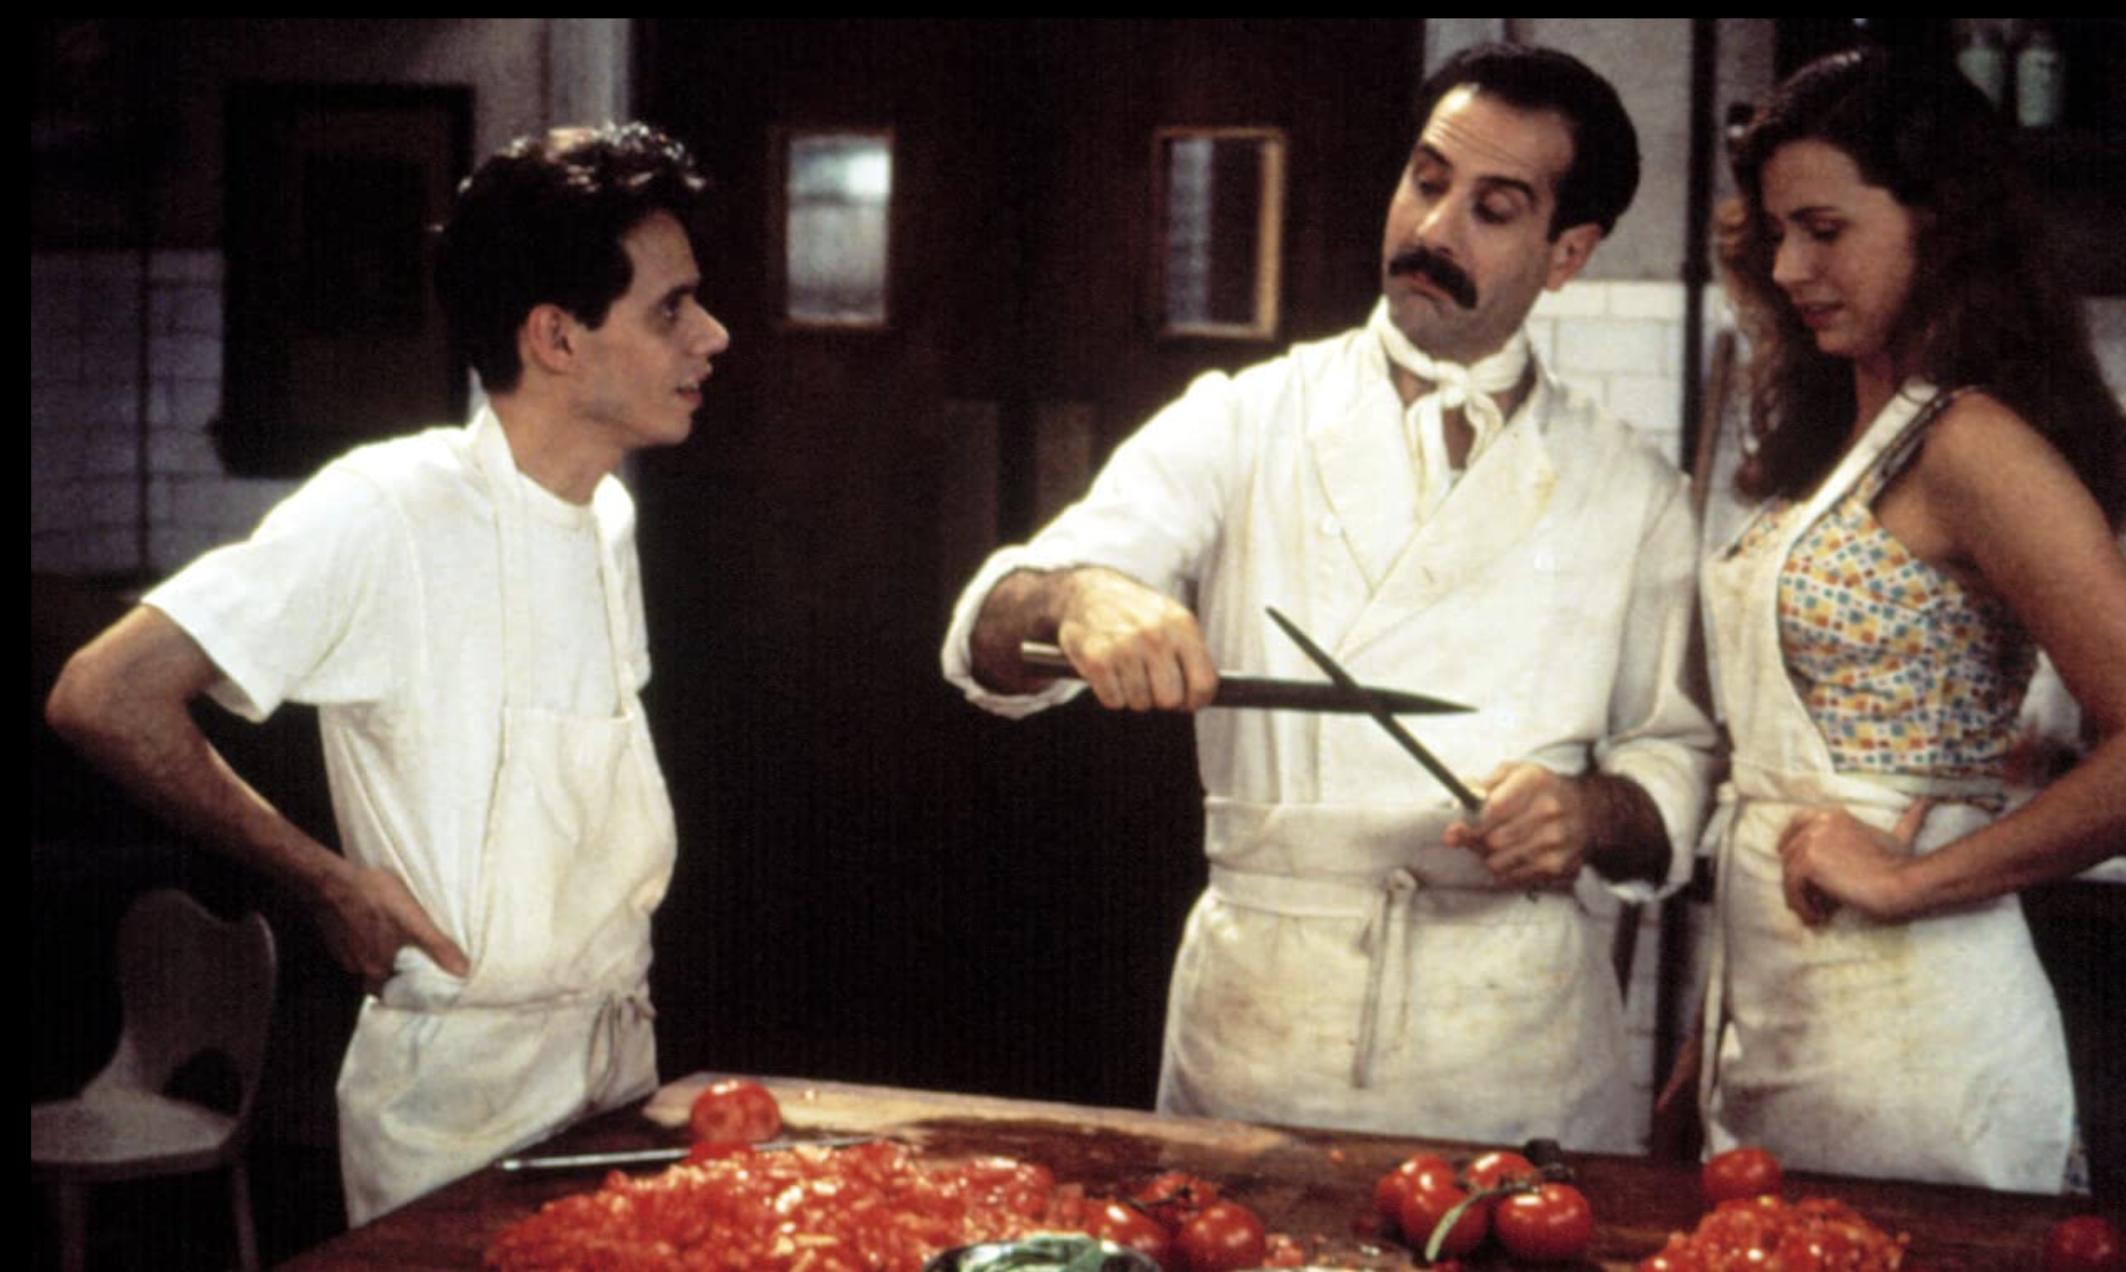 <p>Set in the 1950s on the Jersey shore, Stanley Tucci's directorial debut follows two Italian brothers as they navigate the challenges of running their restaurant.  In a last-ditch effort to save the business, they organize a lavish banquet showcasing their culinary skills featuring the showstopping centerpiece dish, "timpano."  The film's attention to detail and mouthwatering visuals make it a treat for foodies.</p>